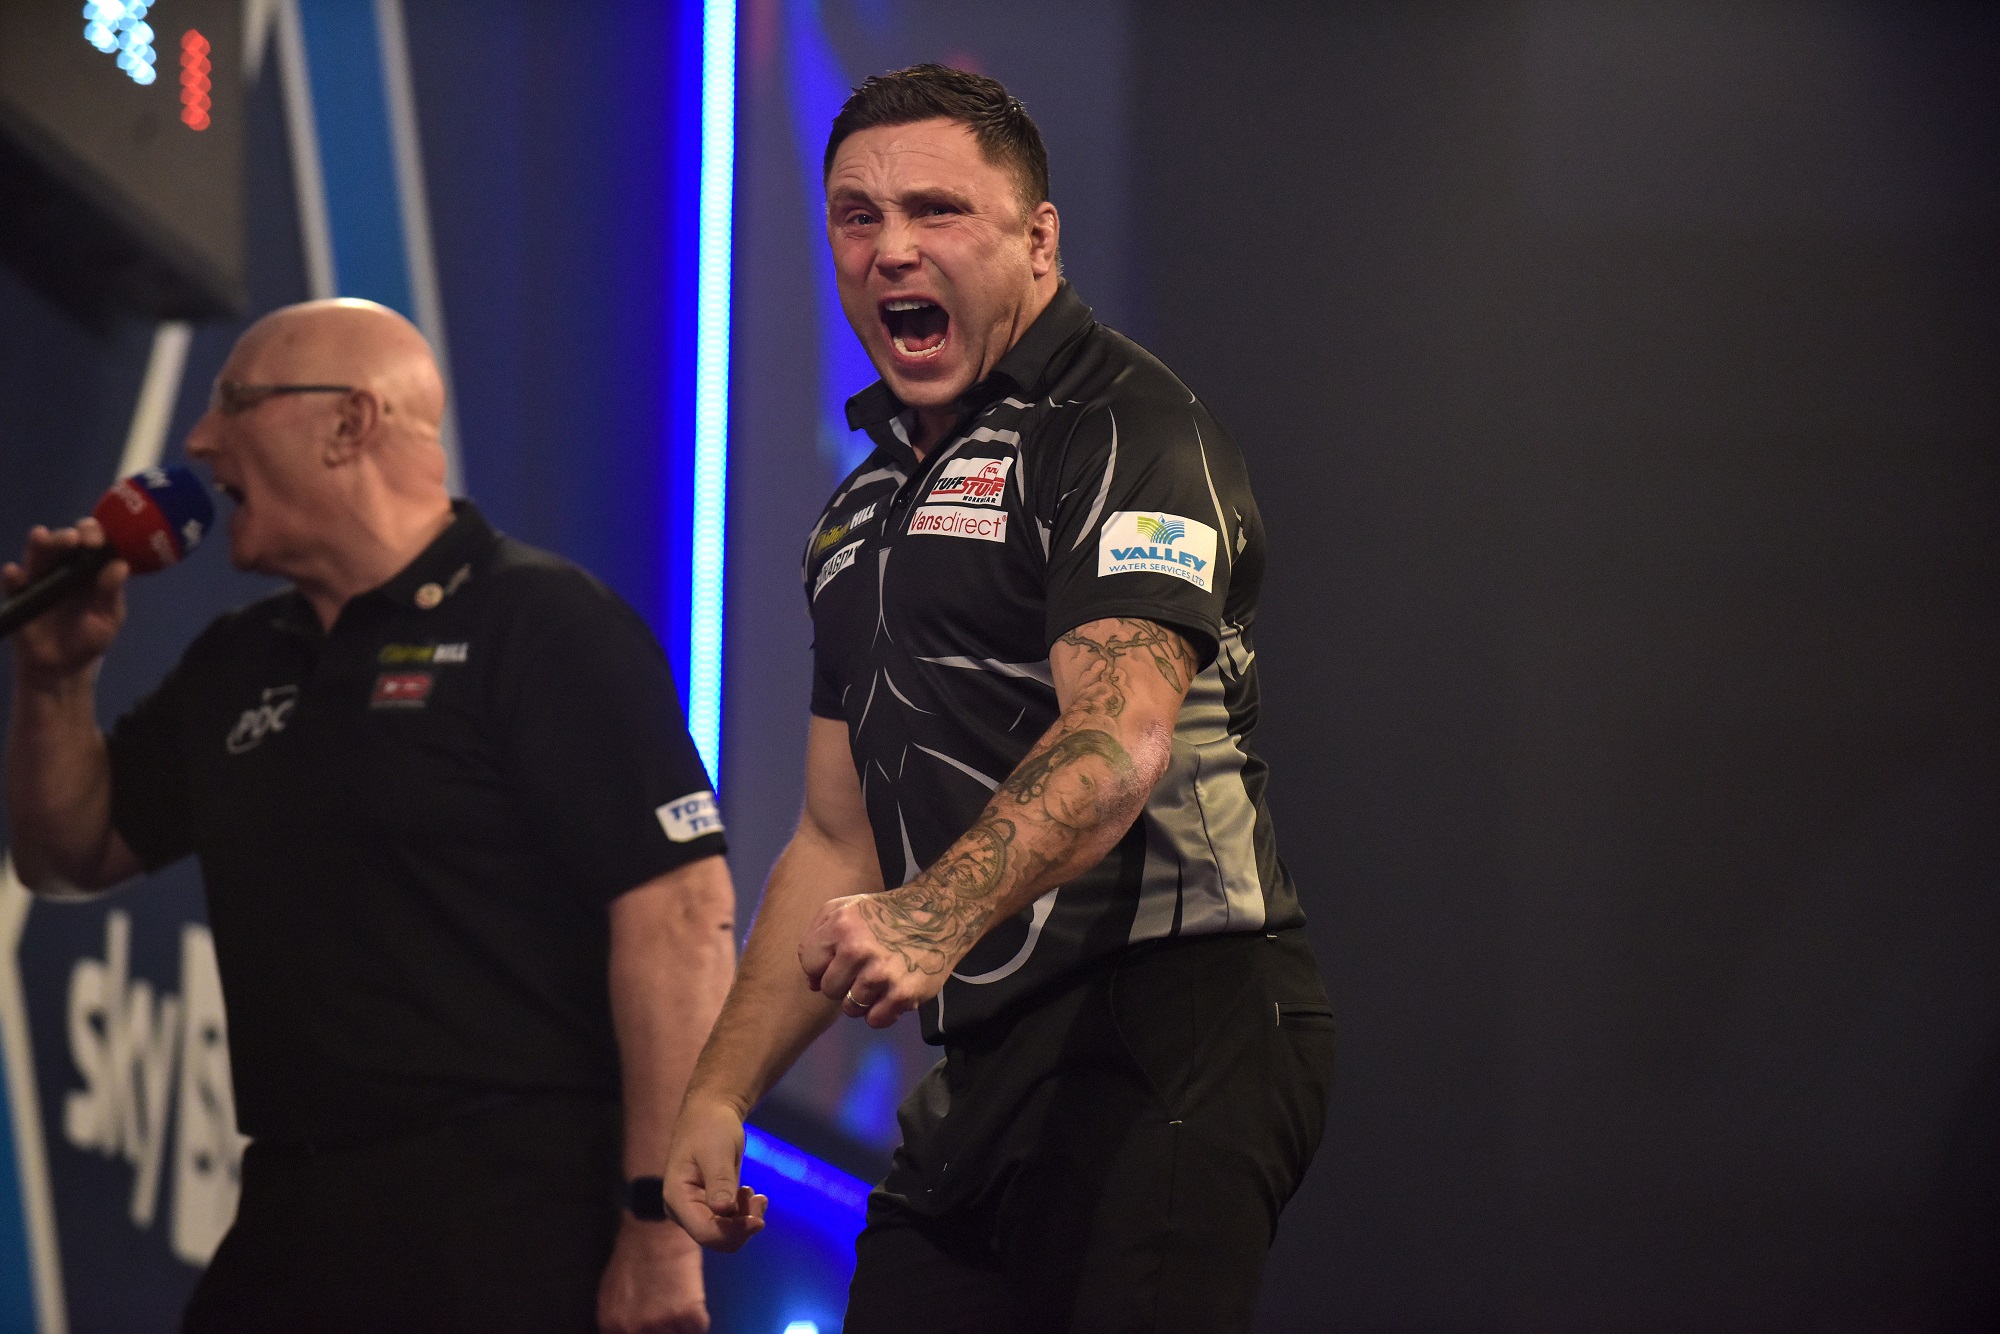 Price battles through on day one of PDC World Darts Championship